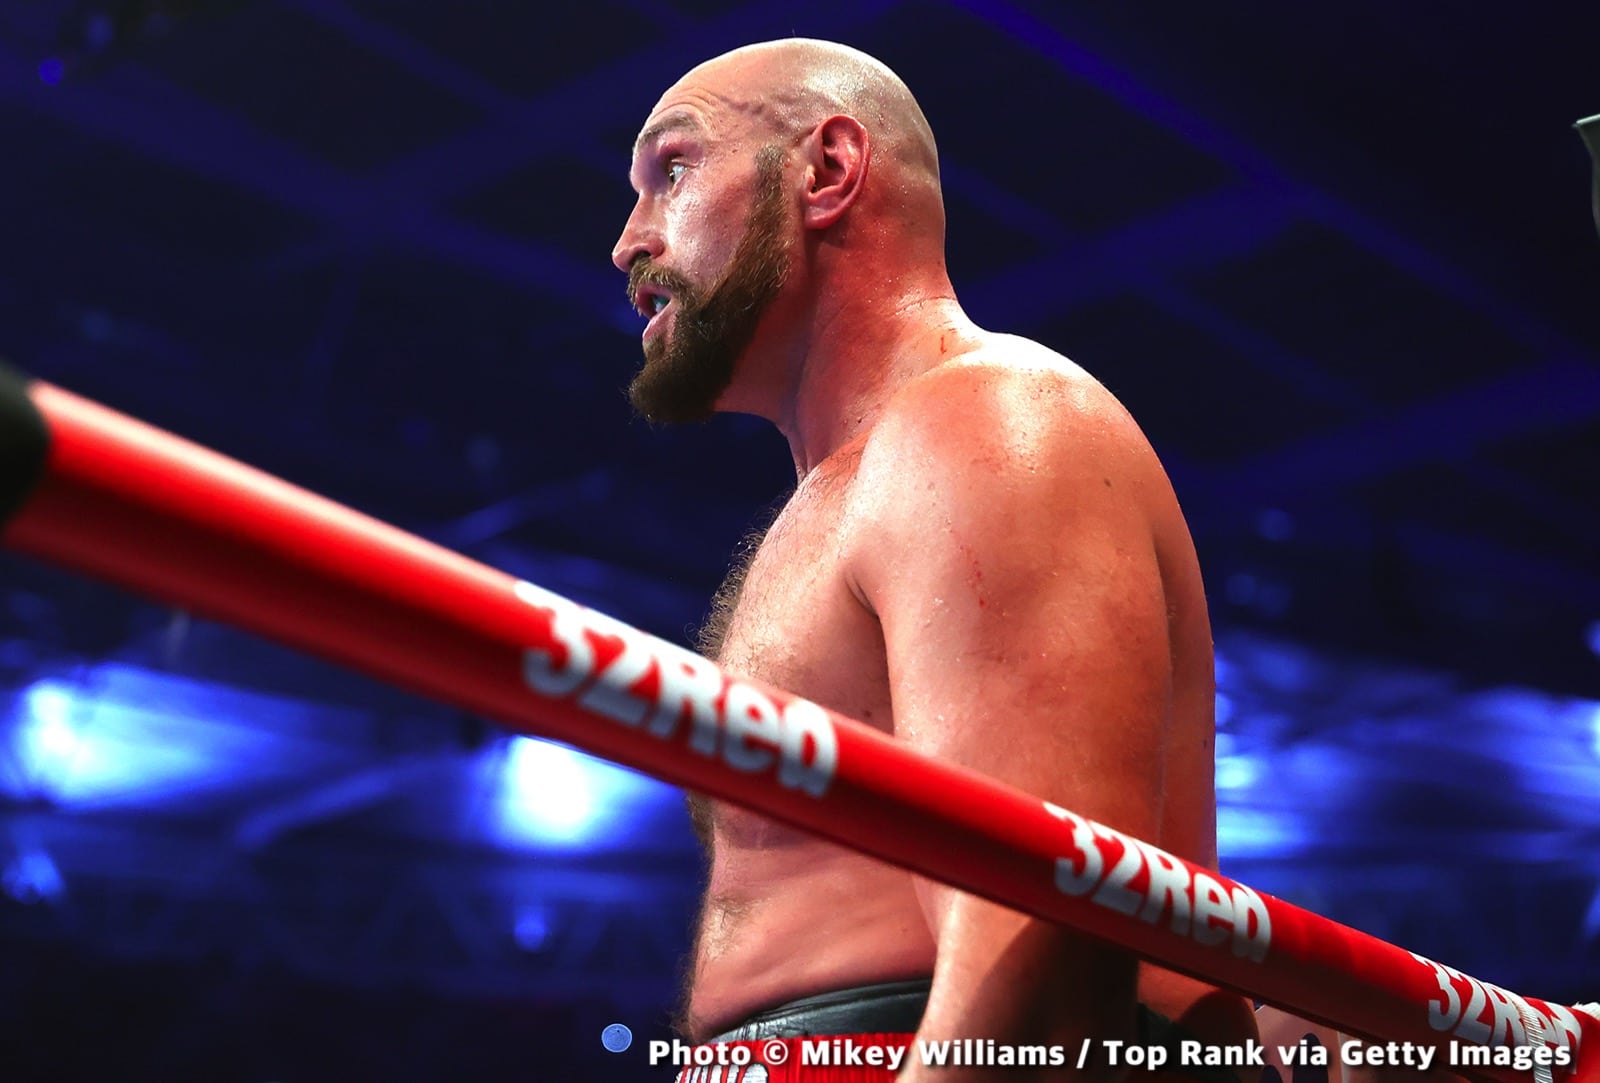 "I don't need tons of money" says Tyson Fury confirming retirement